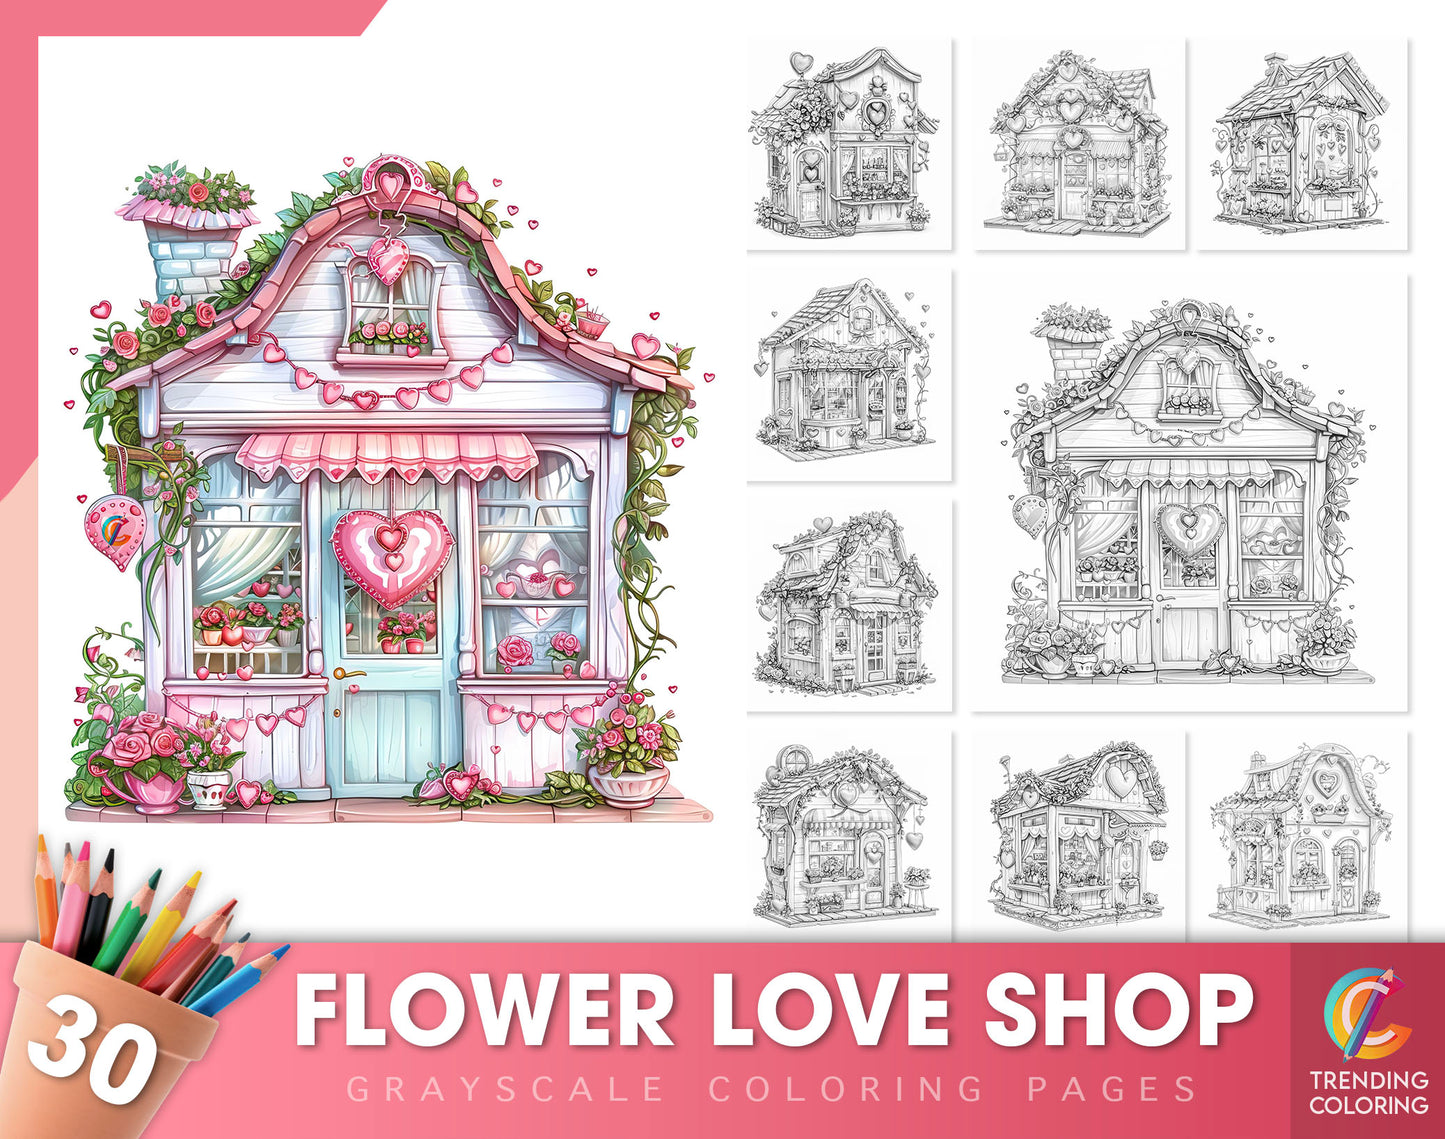 30 Flower Love Shop Grayscale Coloring Pages - Instant Download - Printable PDF Dark/Light